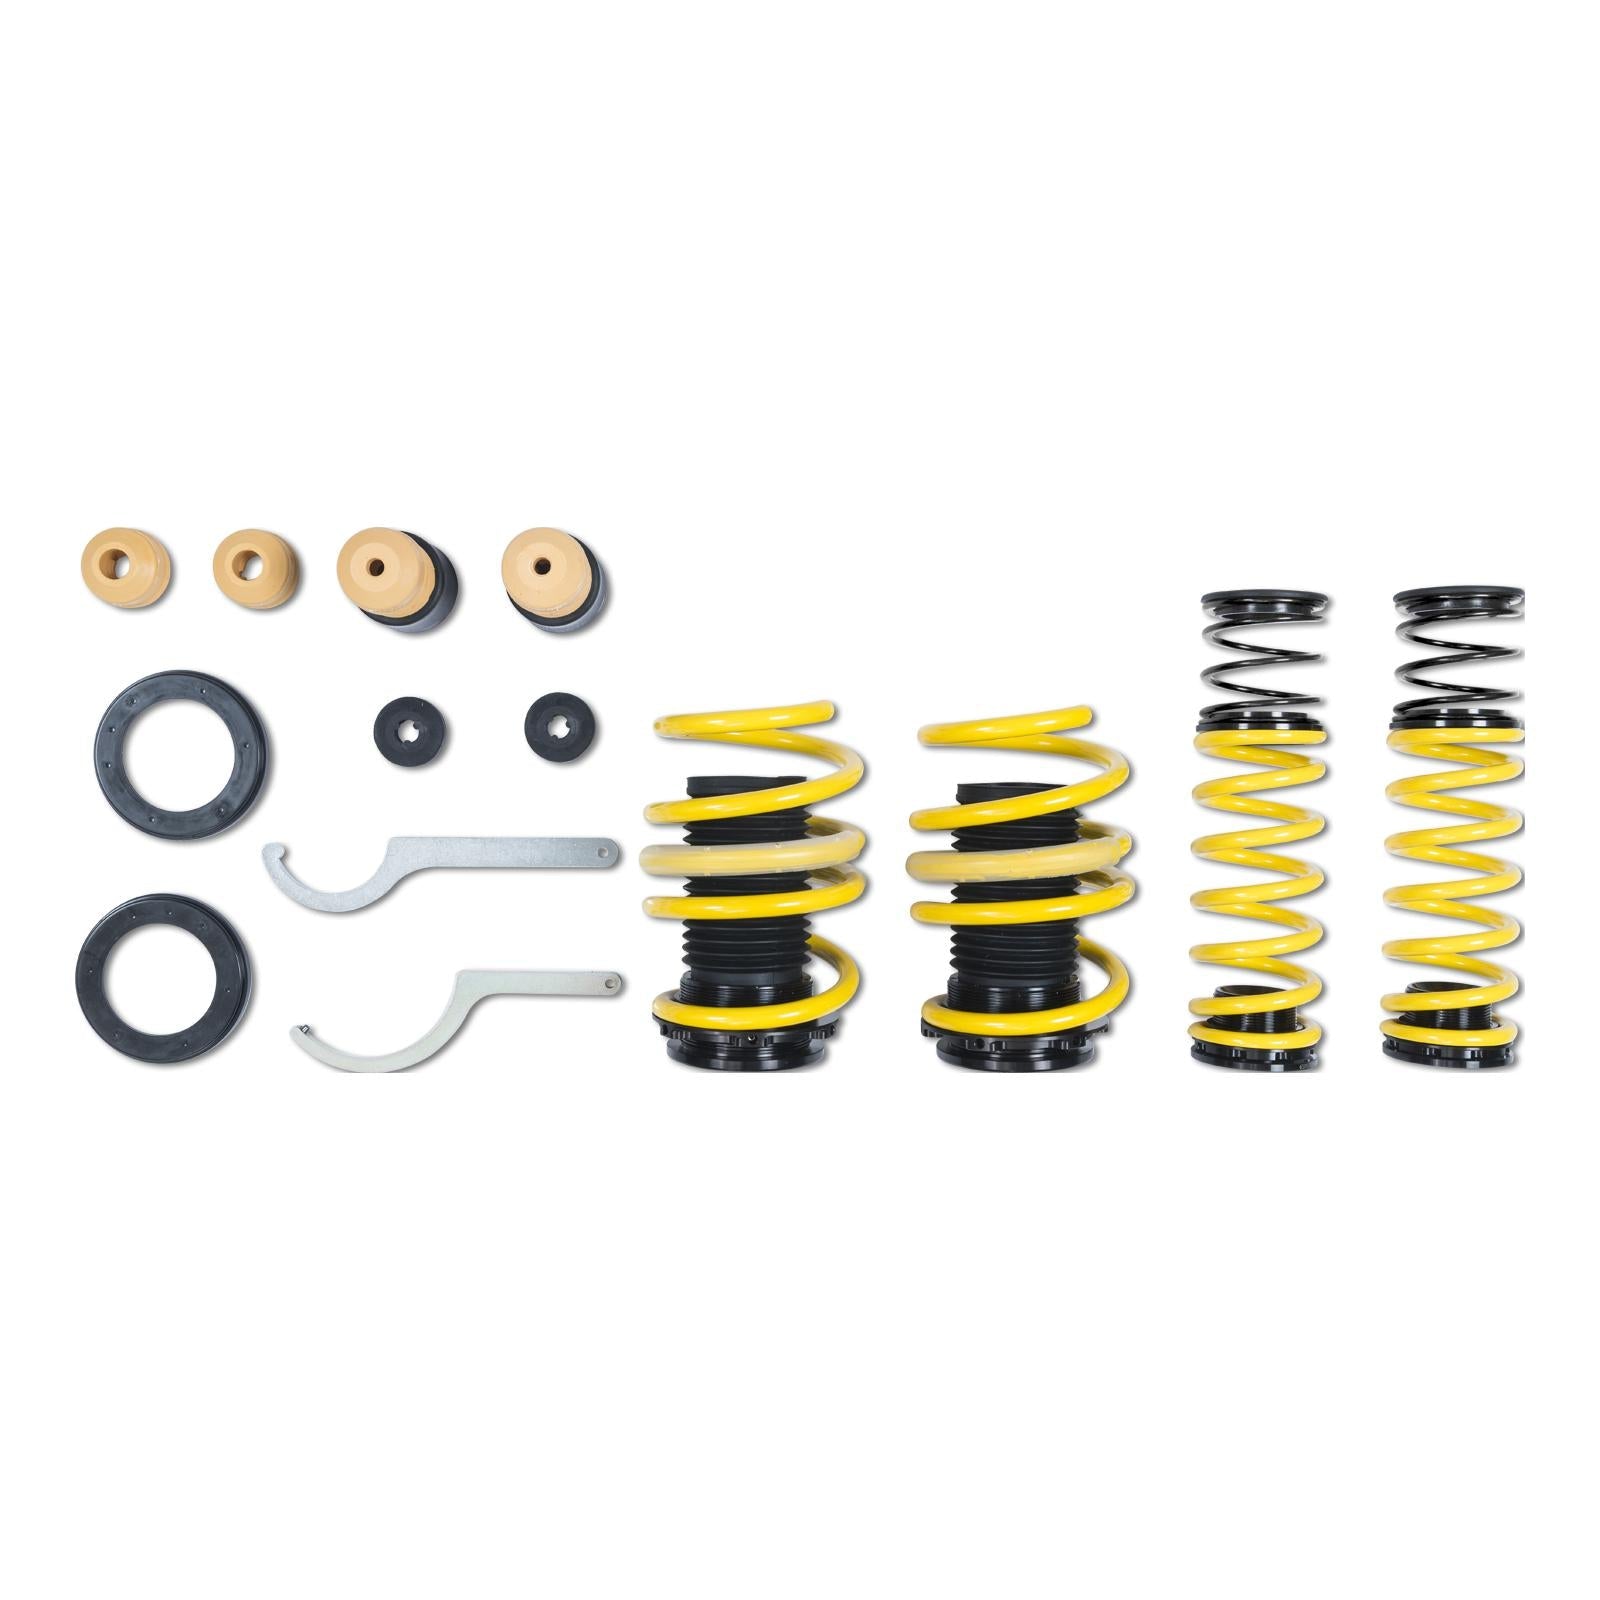 ST Suspensions Adjustable Lowering Springs - Audi 80A Q5 Without EDC System (Excludes Models with automatic level control)